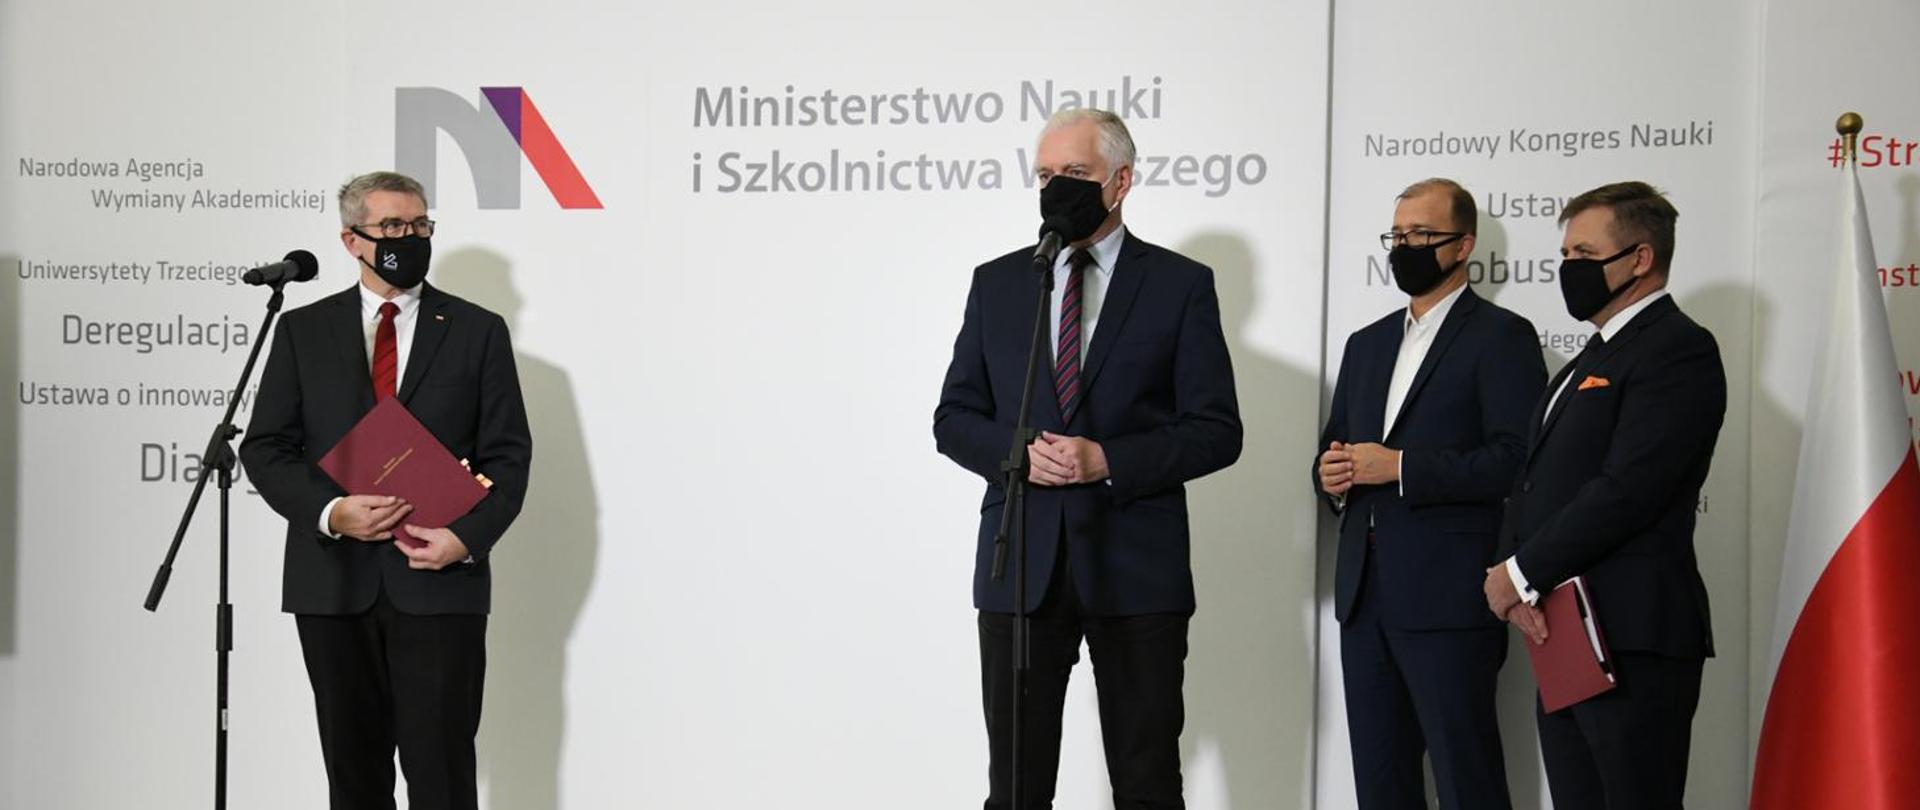 Deputy Prime Minister Jarosław Gowin in today’s execution of the contract with the Centre